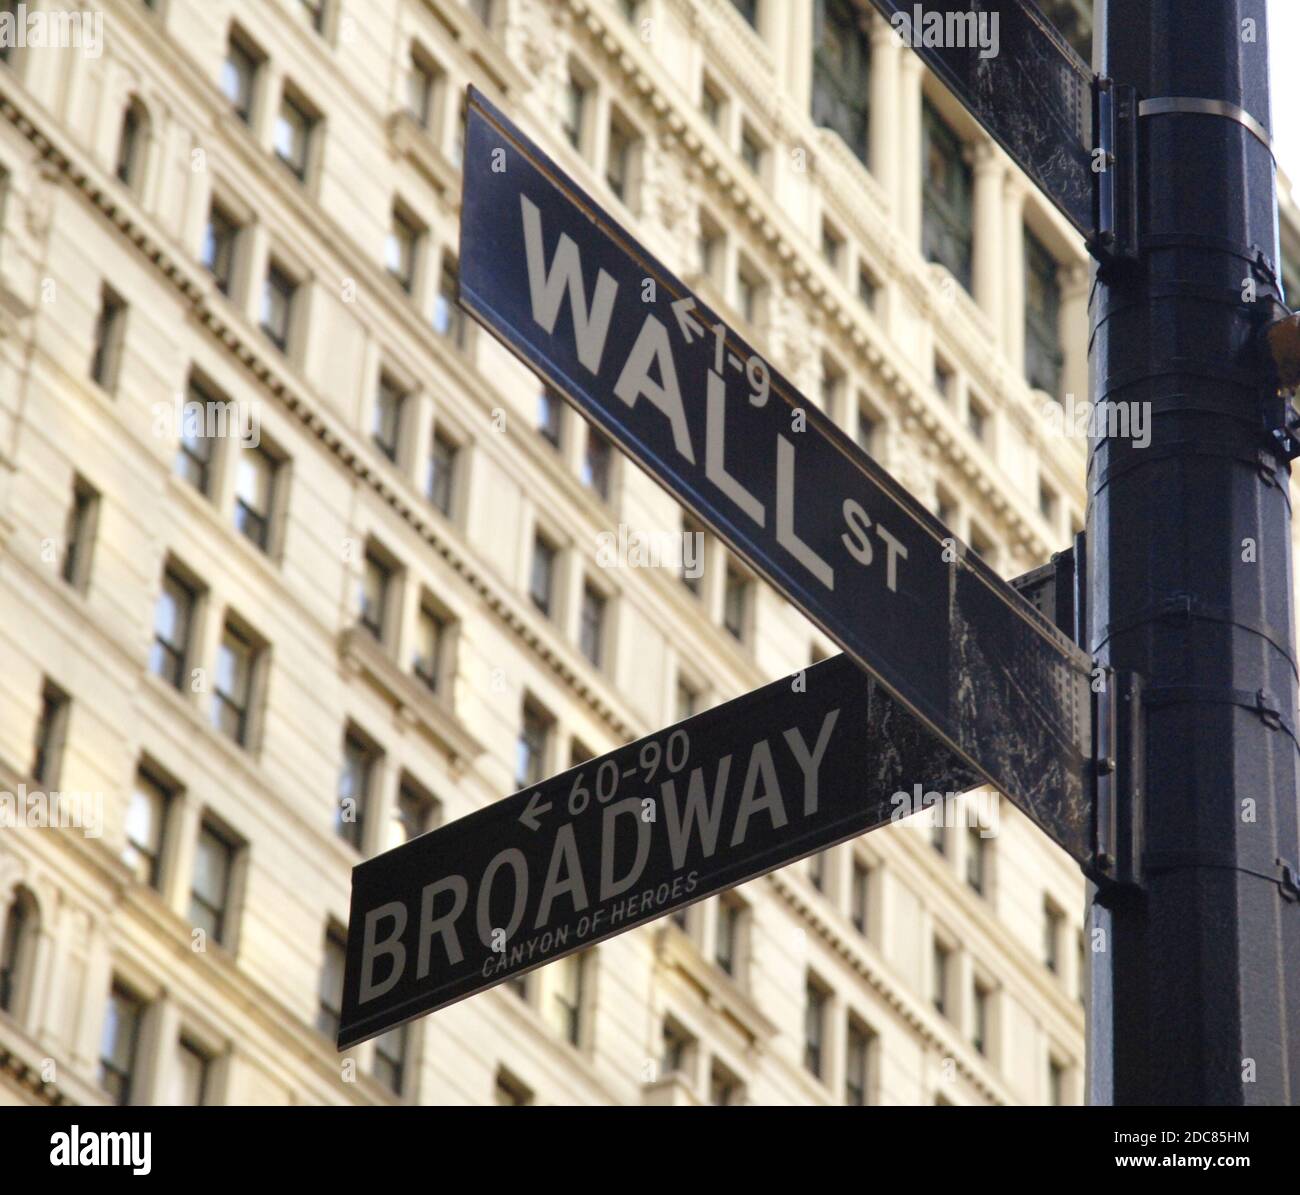 New York Street Sign - Wall Street and Broadway Stock Photo